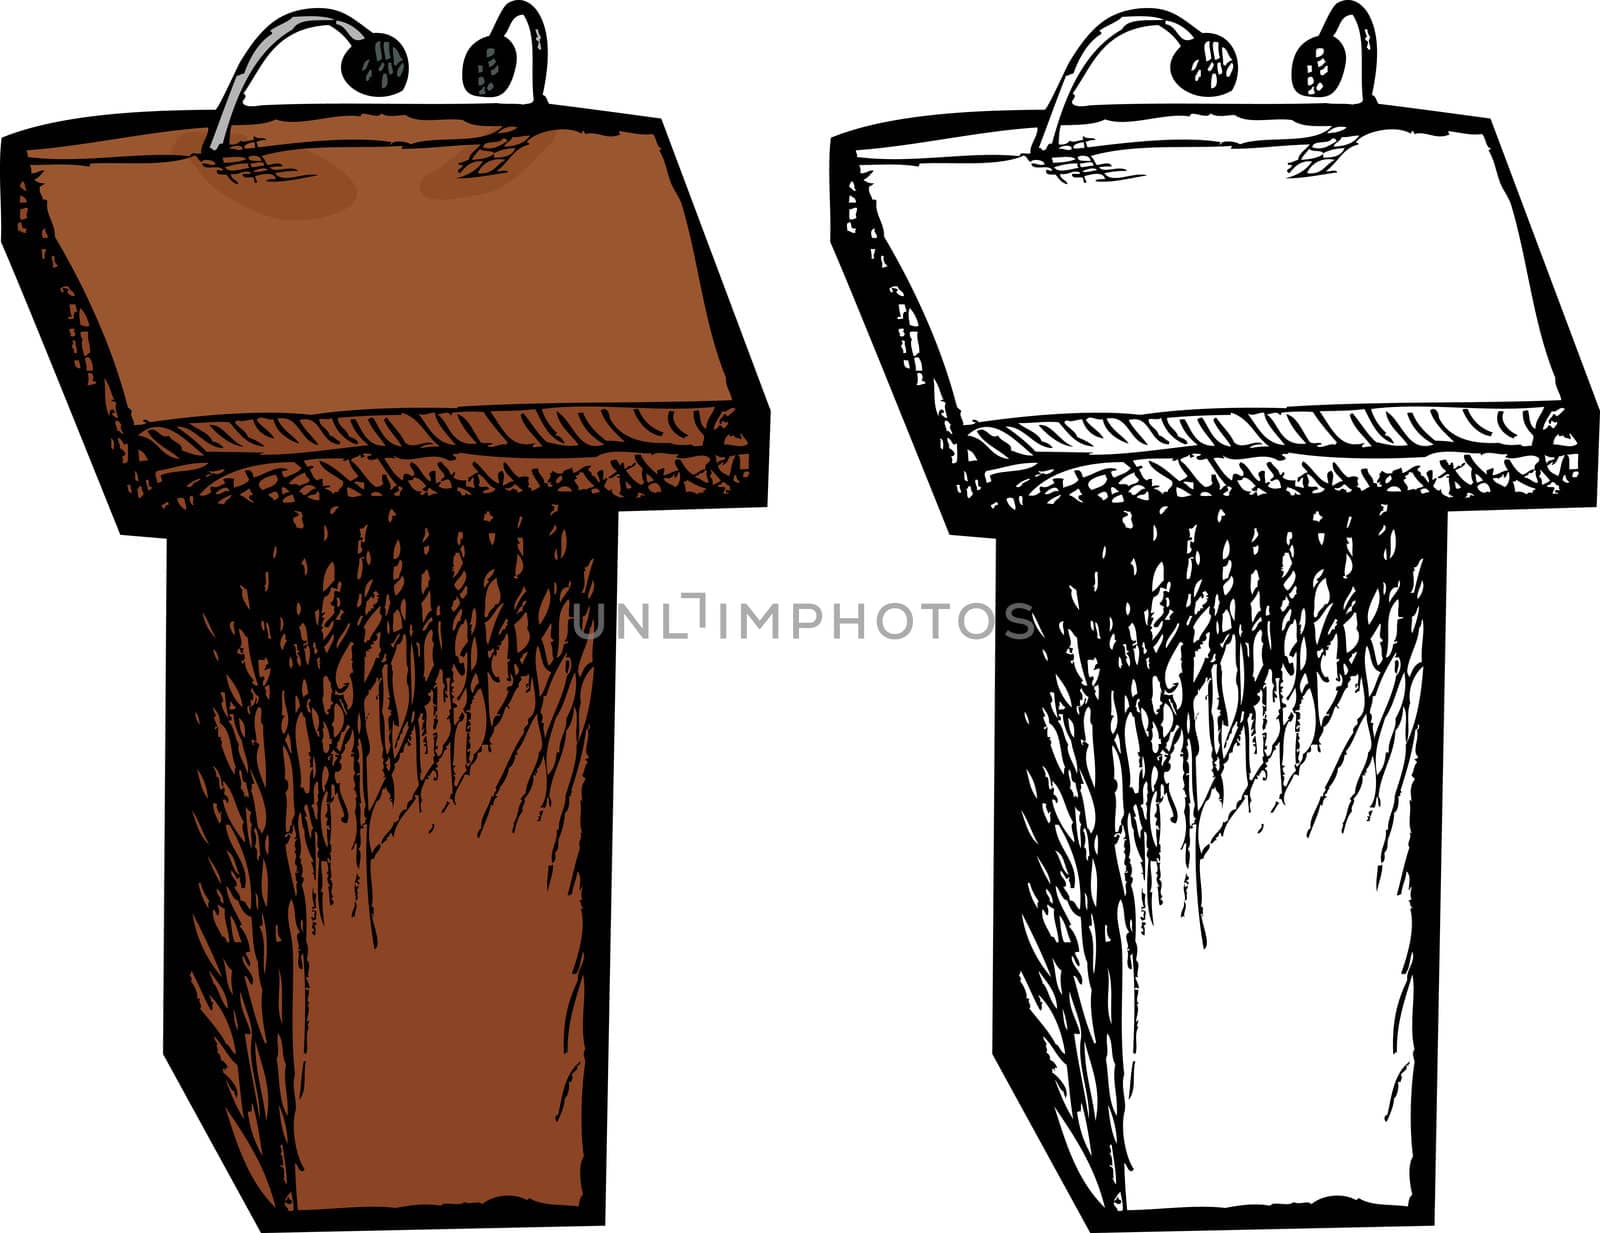 Color and black and white lectern cartoons